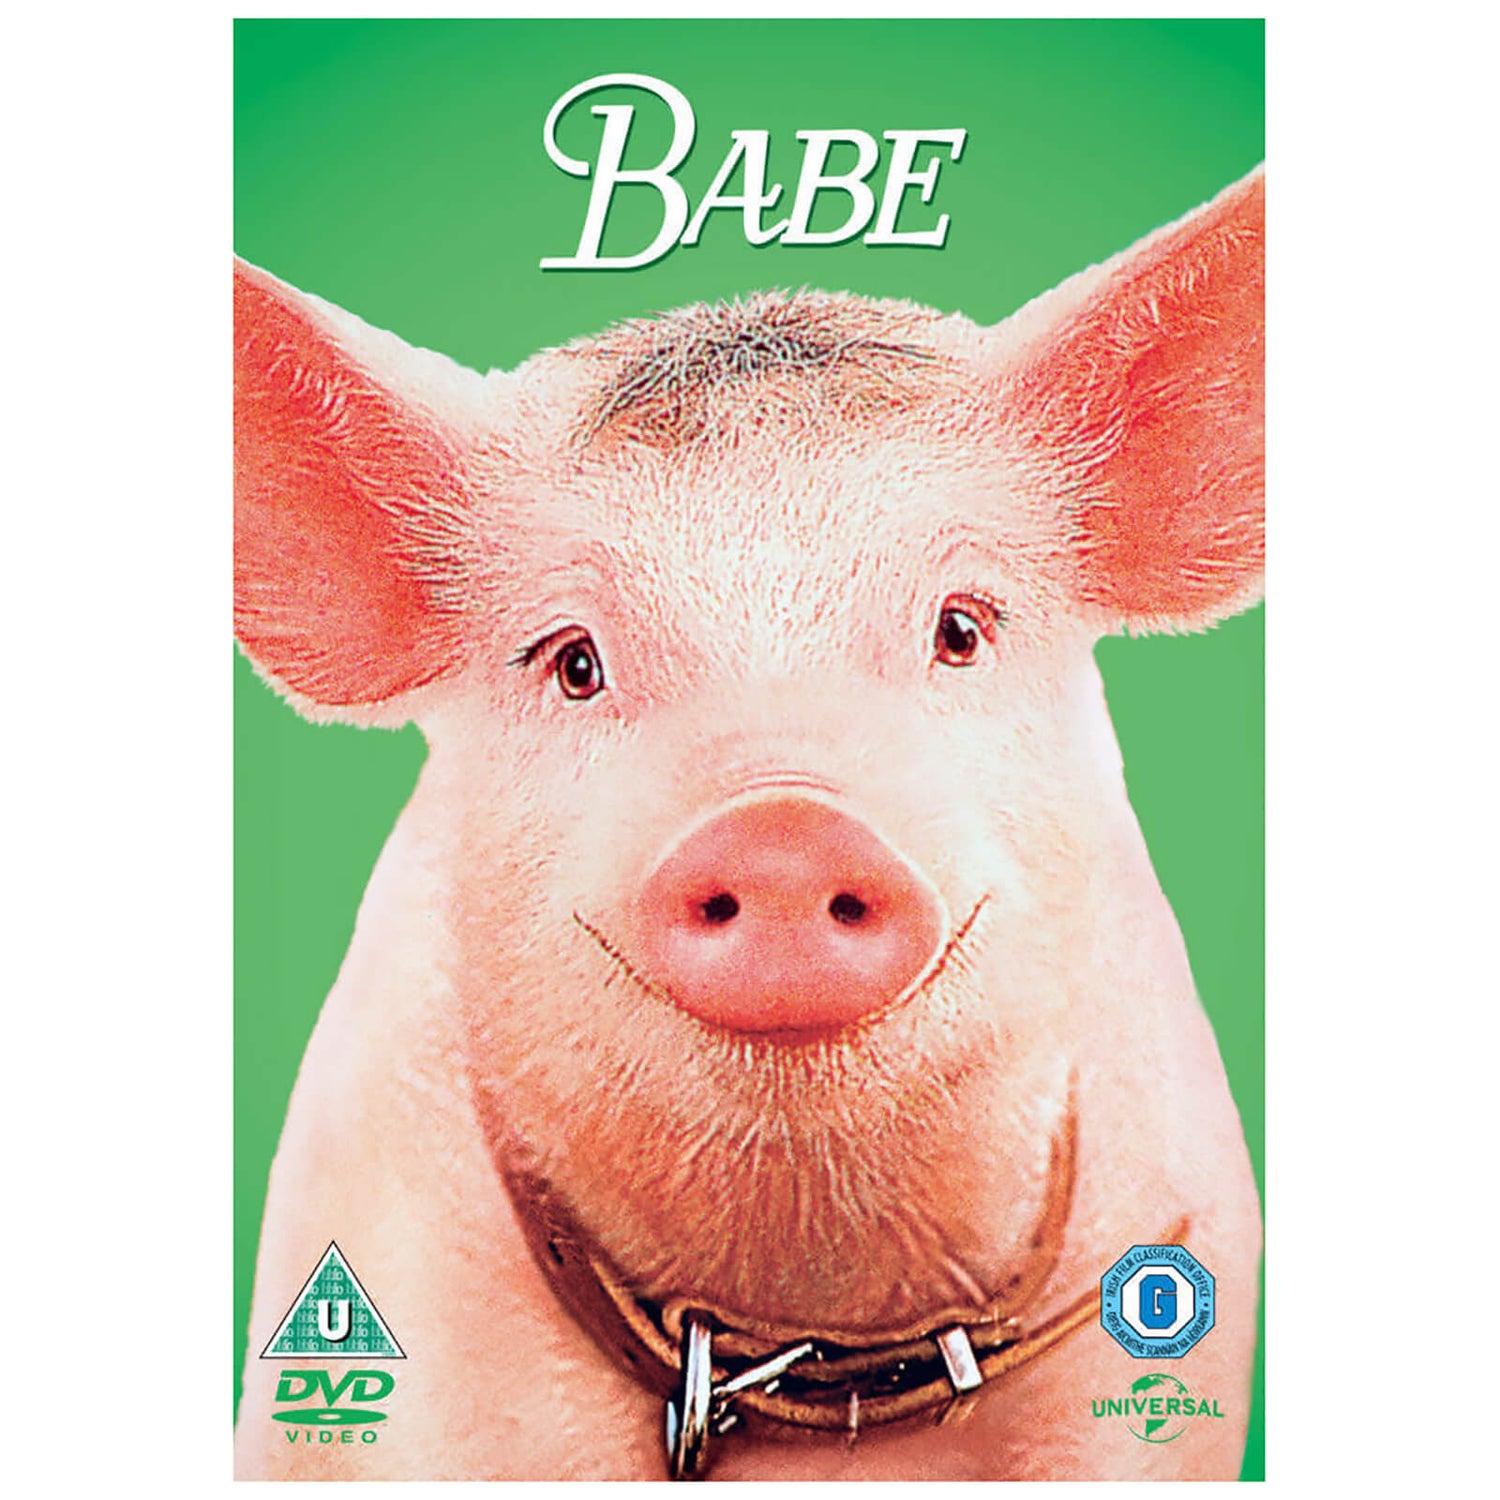 Babe: The Gallant Pig - Big Face Edition